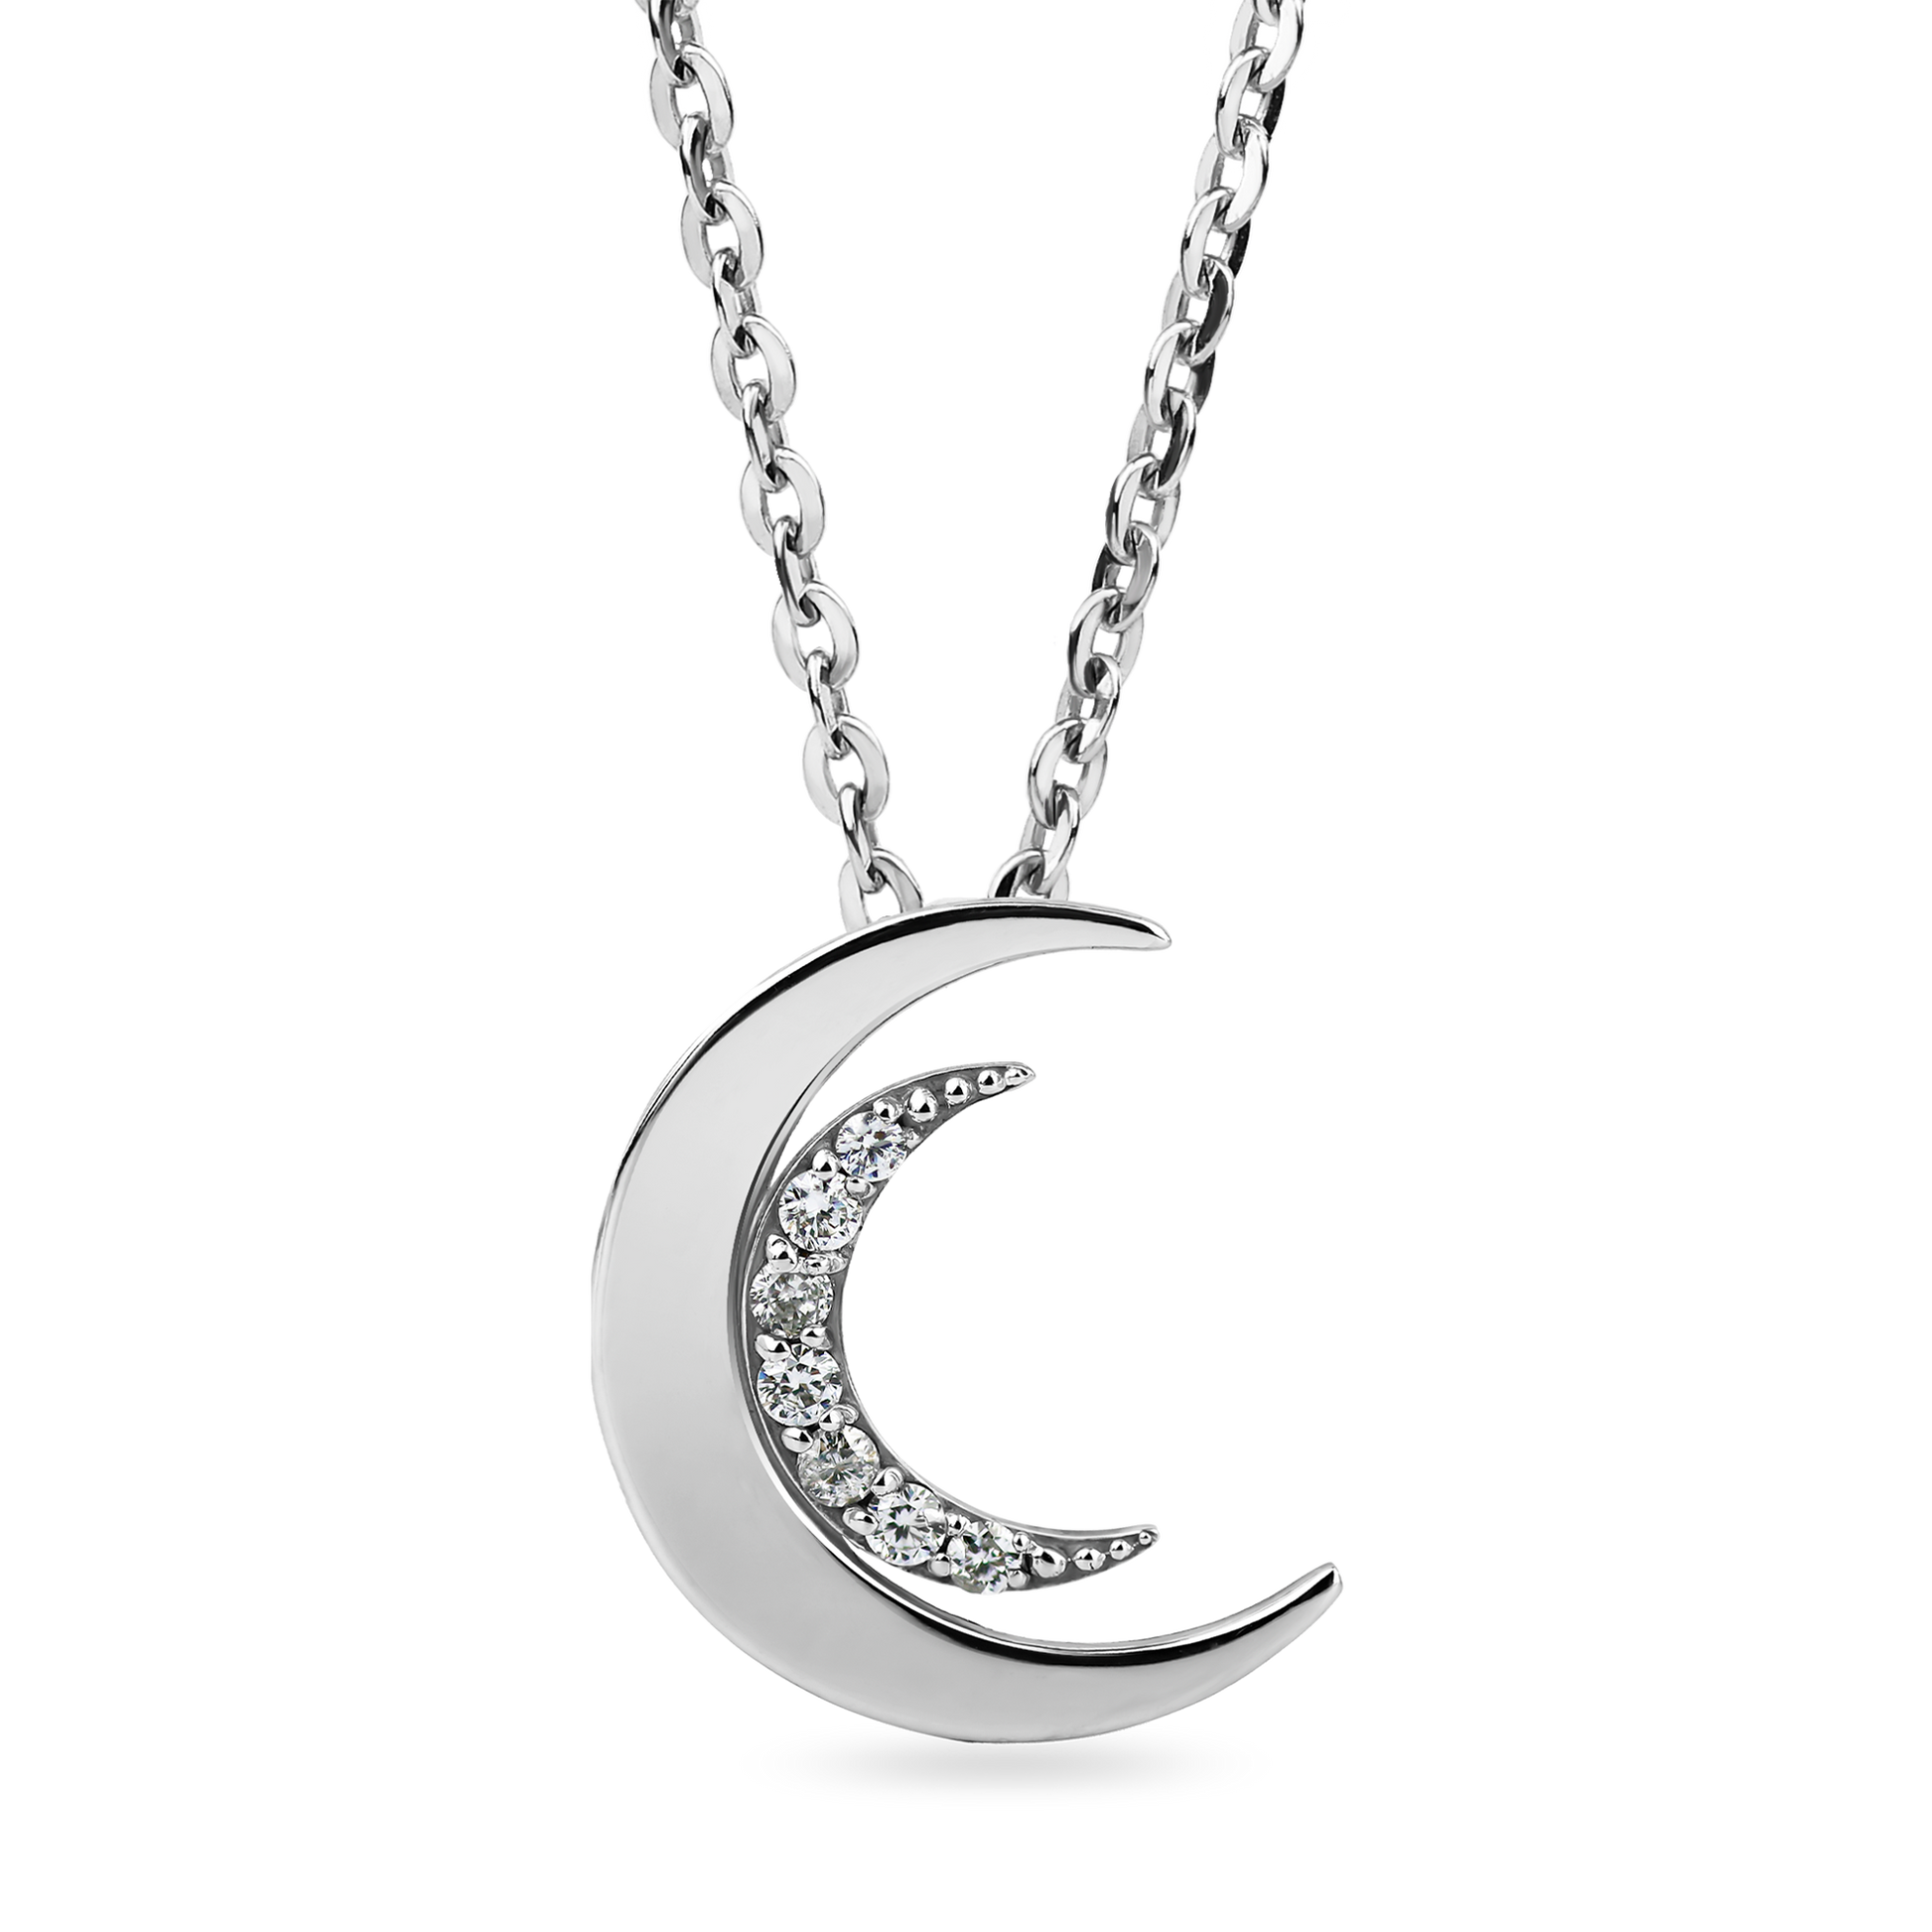 SENYDA TWINKLE - GOLD DIAMOND DOUBLE MOON WITH THE SAME FRONT AND BACK SILE NECKLACE Senyda JewelsSenyda Twinkle - Gold Diamond Double Moon With The Same Front And Back Sile Necklace